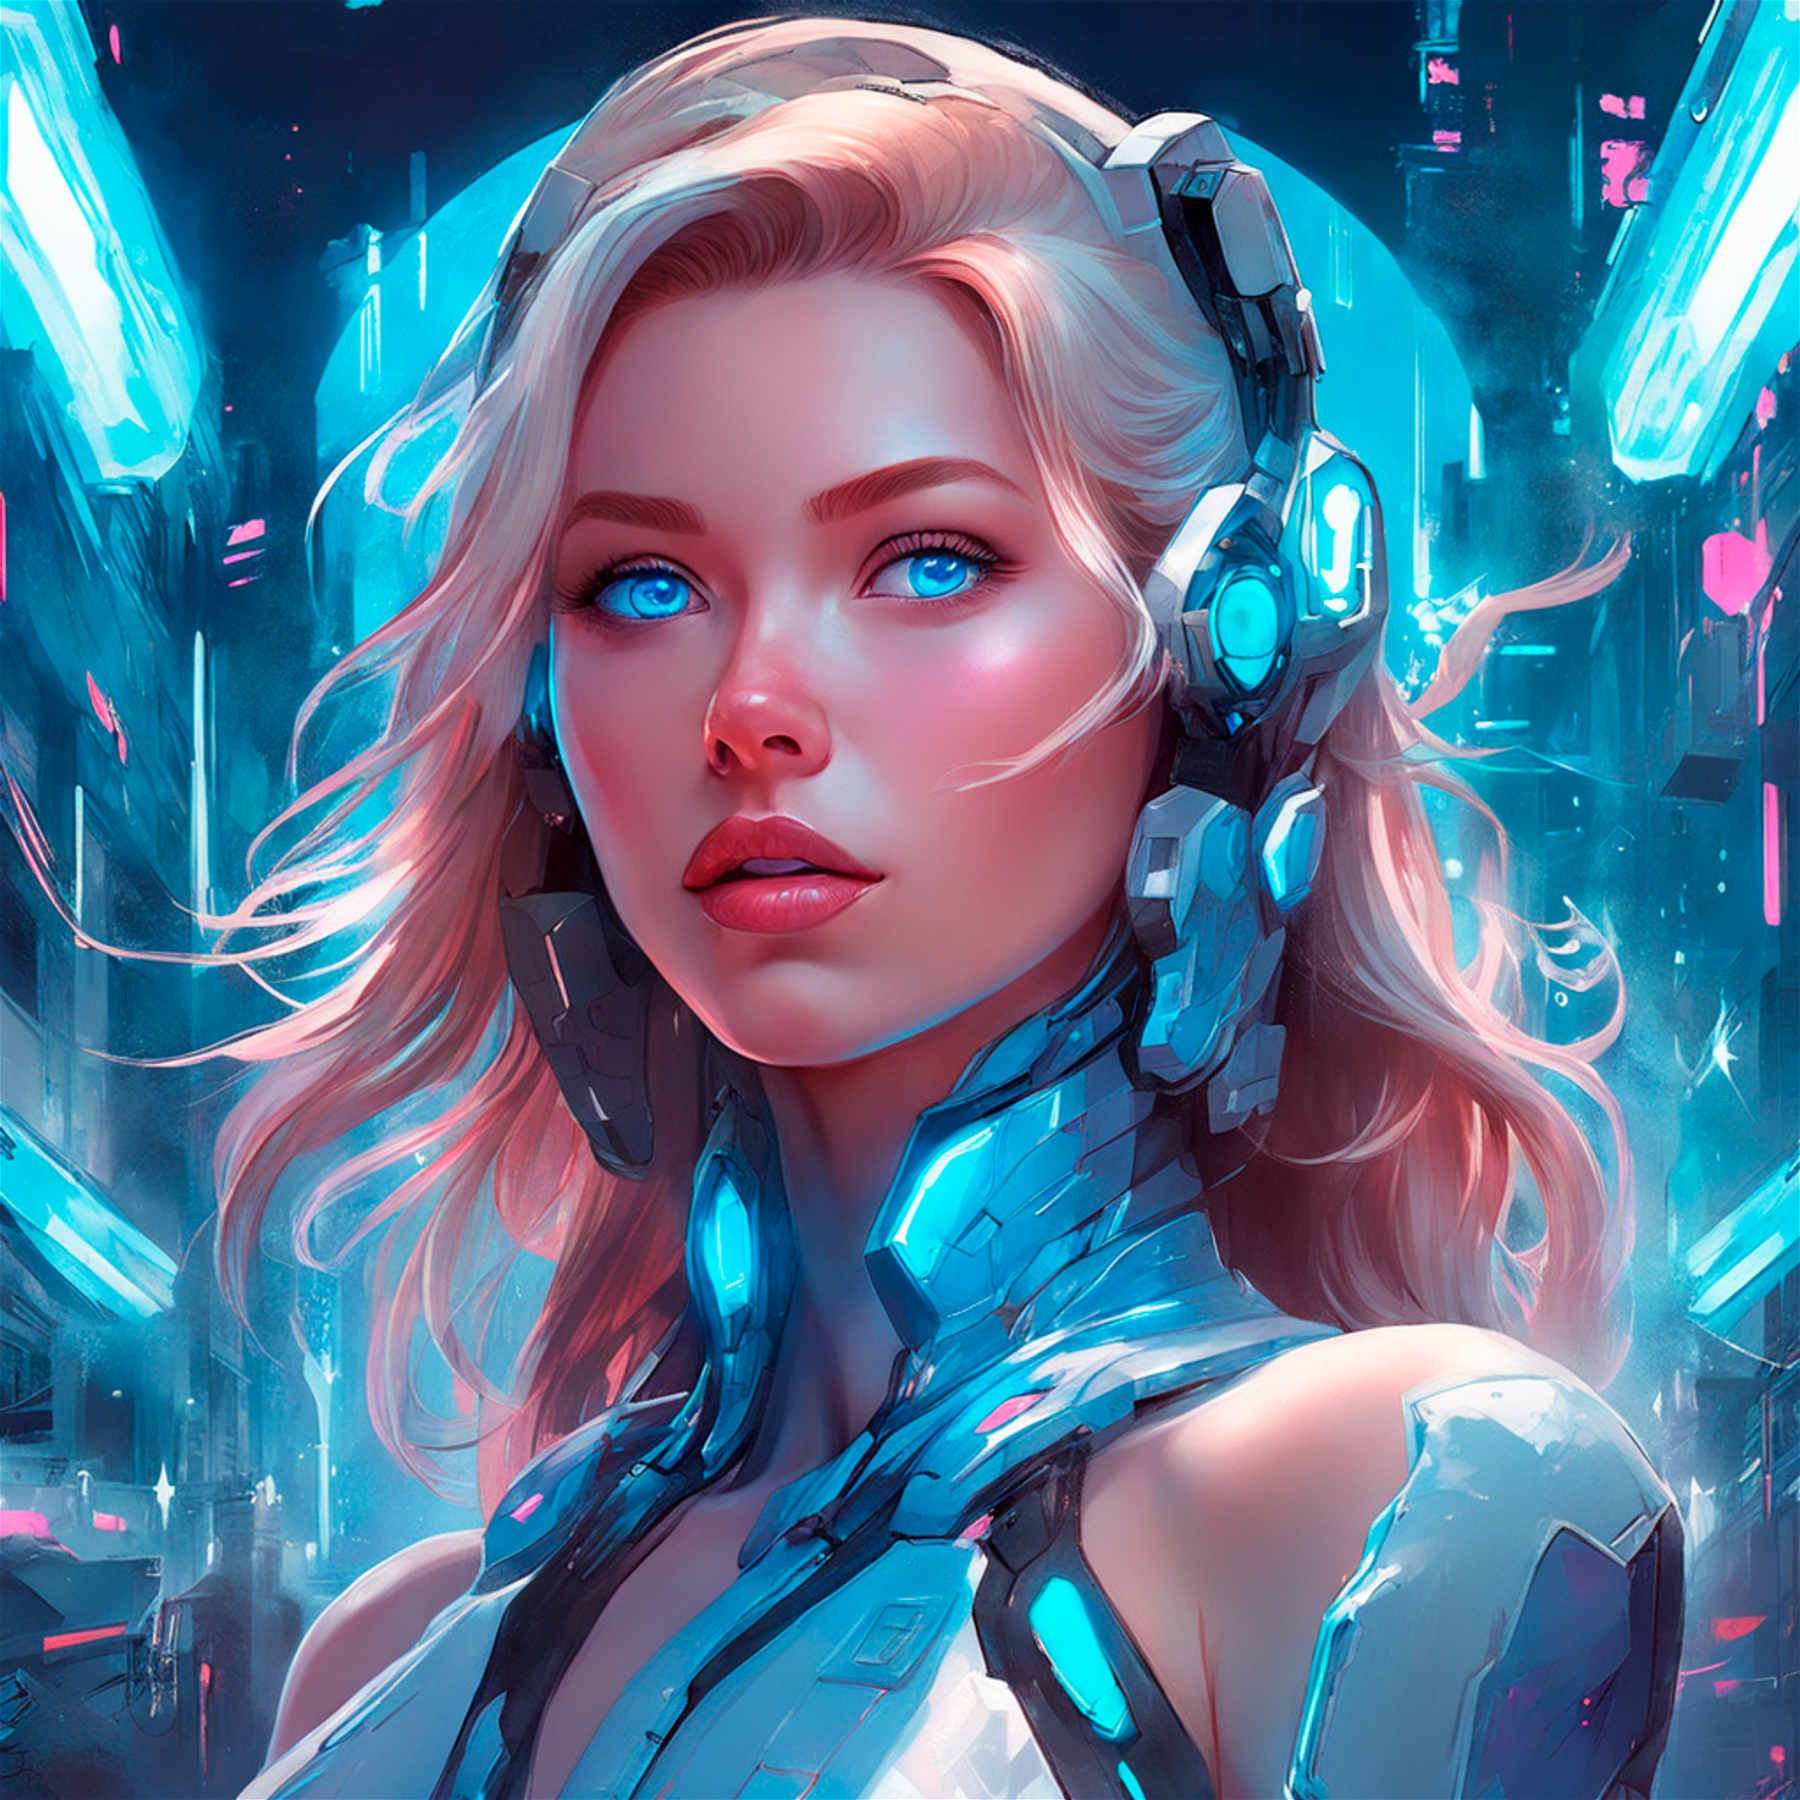 Beautiful space princess painting, epic cyberpunk manga, art by , rossdraws, in the style of , Pixar Disney, accent lighting neon lamp, large blue eyes, elegant post-processing fine details intricate details cinematic